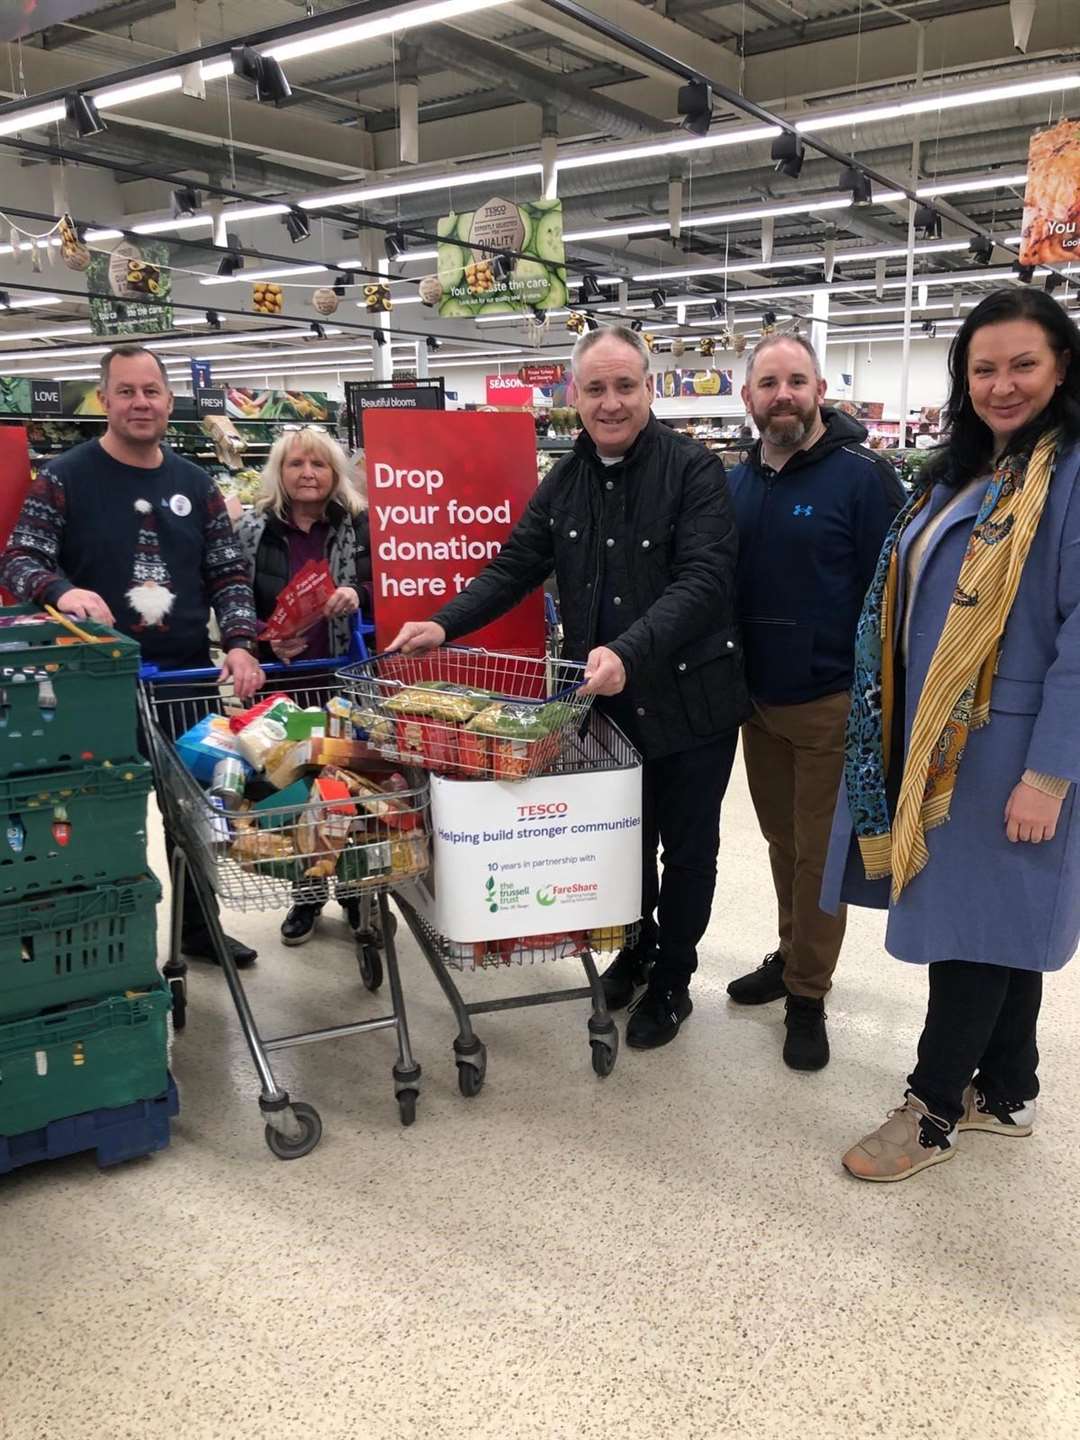 Andy Stewart, Store Manager, Cllr Scott Lawrence, Val and Hanna (volunteers at Moray Food Plus) with Richard Lochhead (centre).